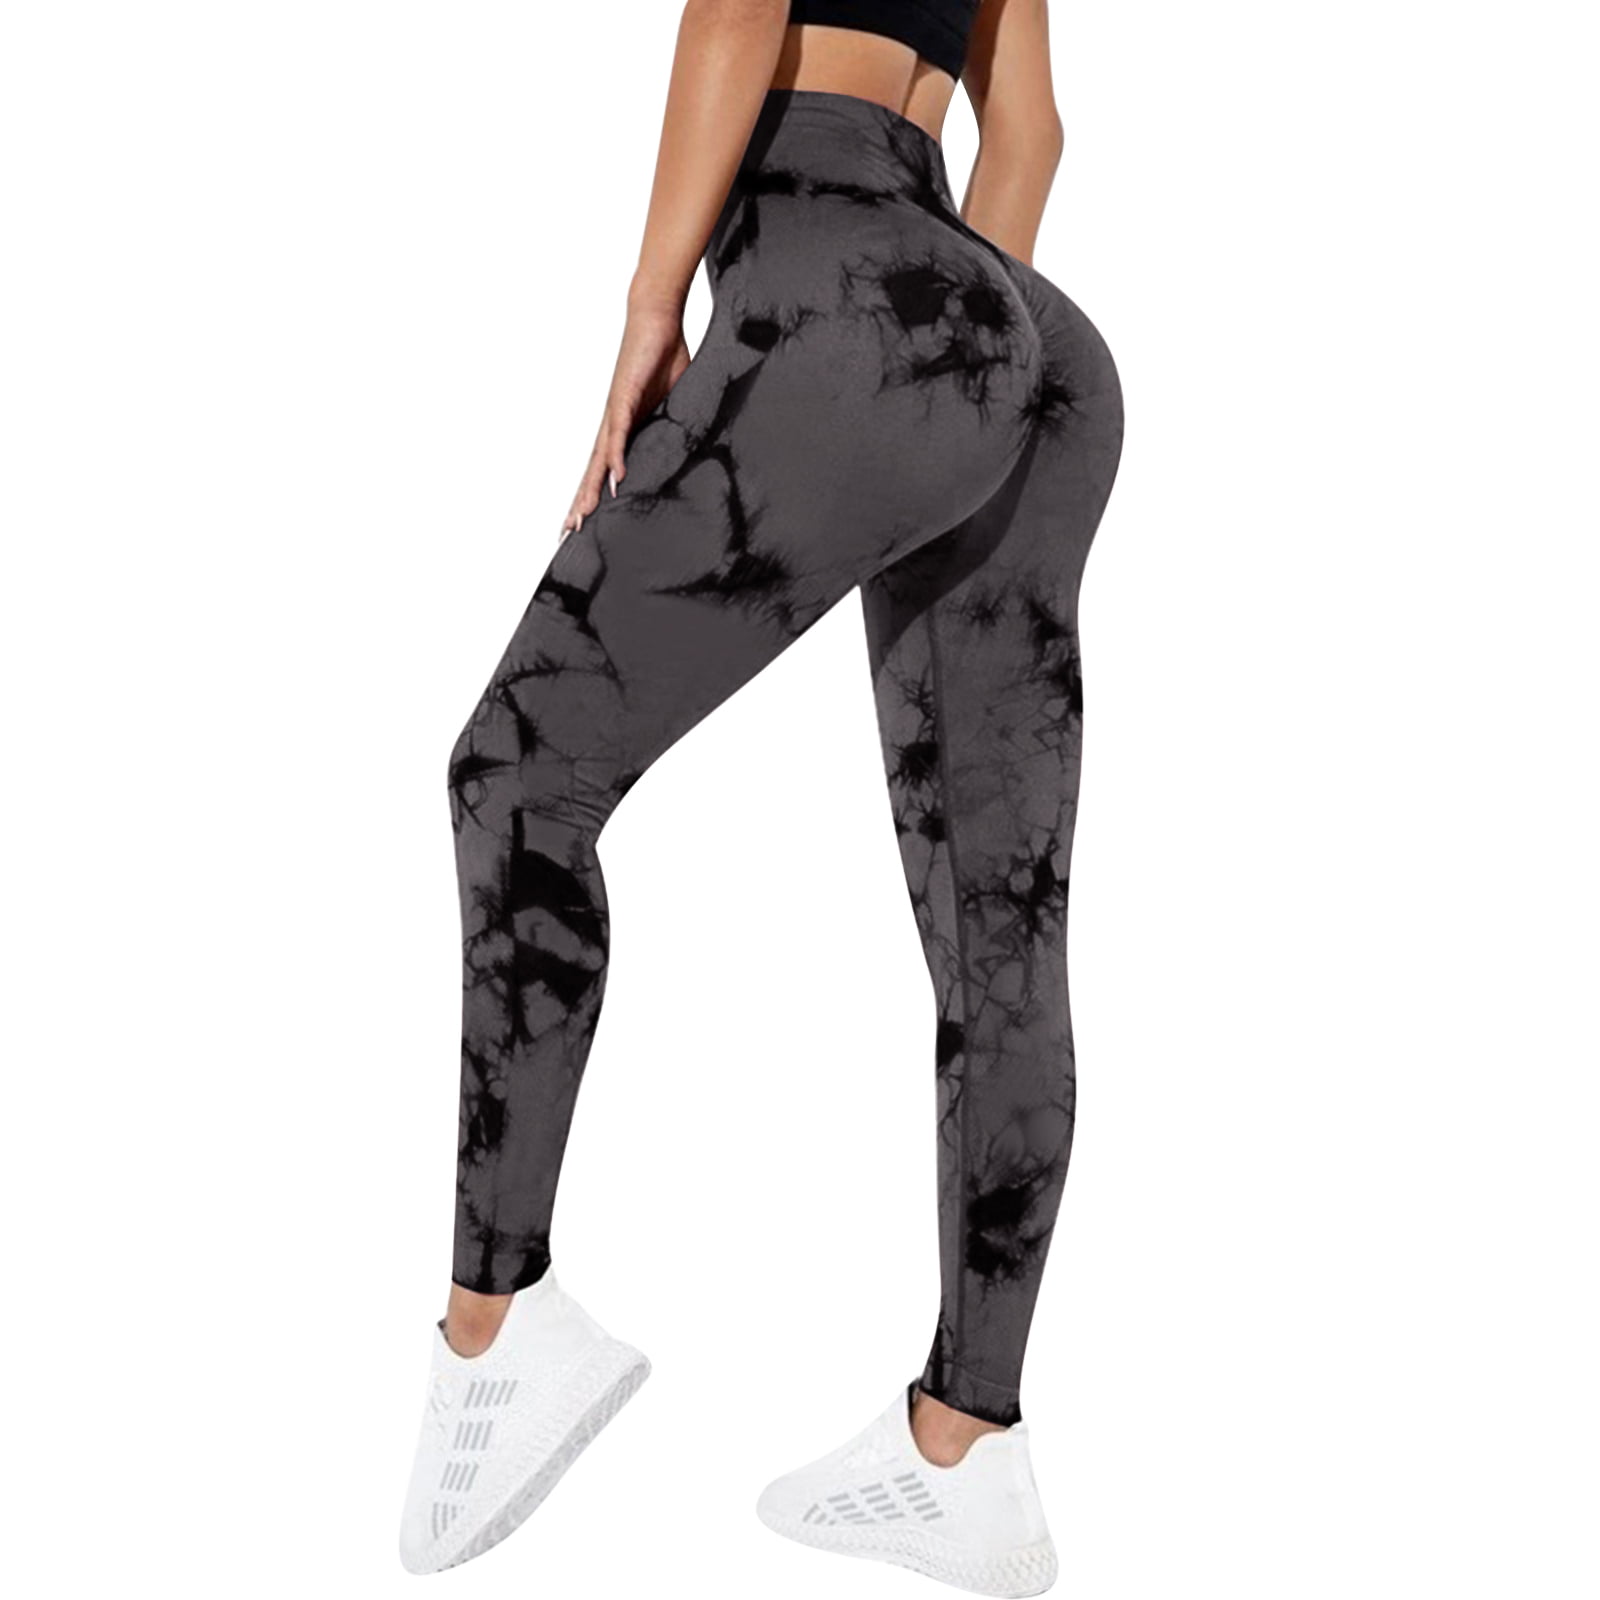 Buy Under Armour Gym leggings and Pants for Women - Free Shipping!-mncb.edu.vn